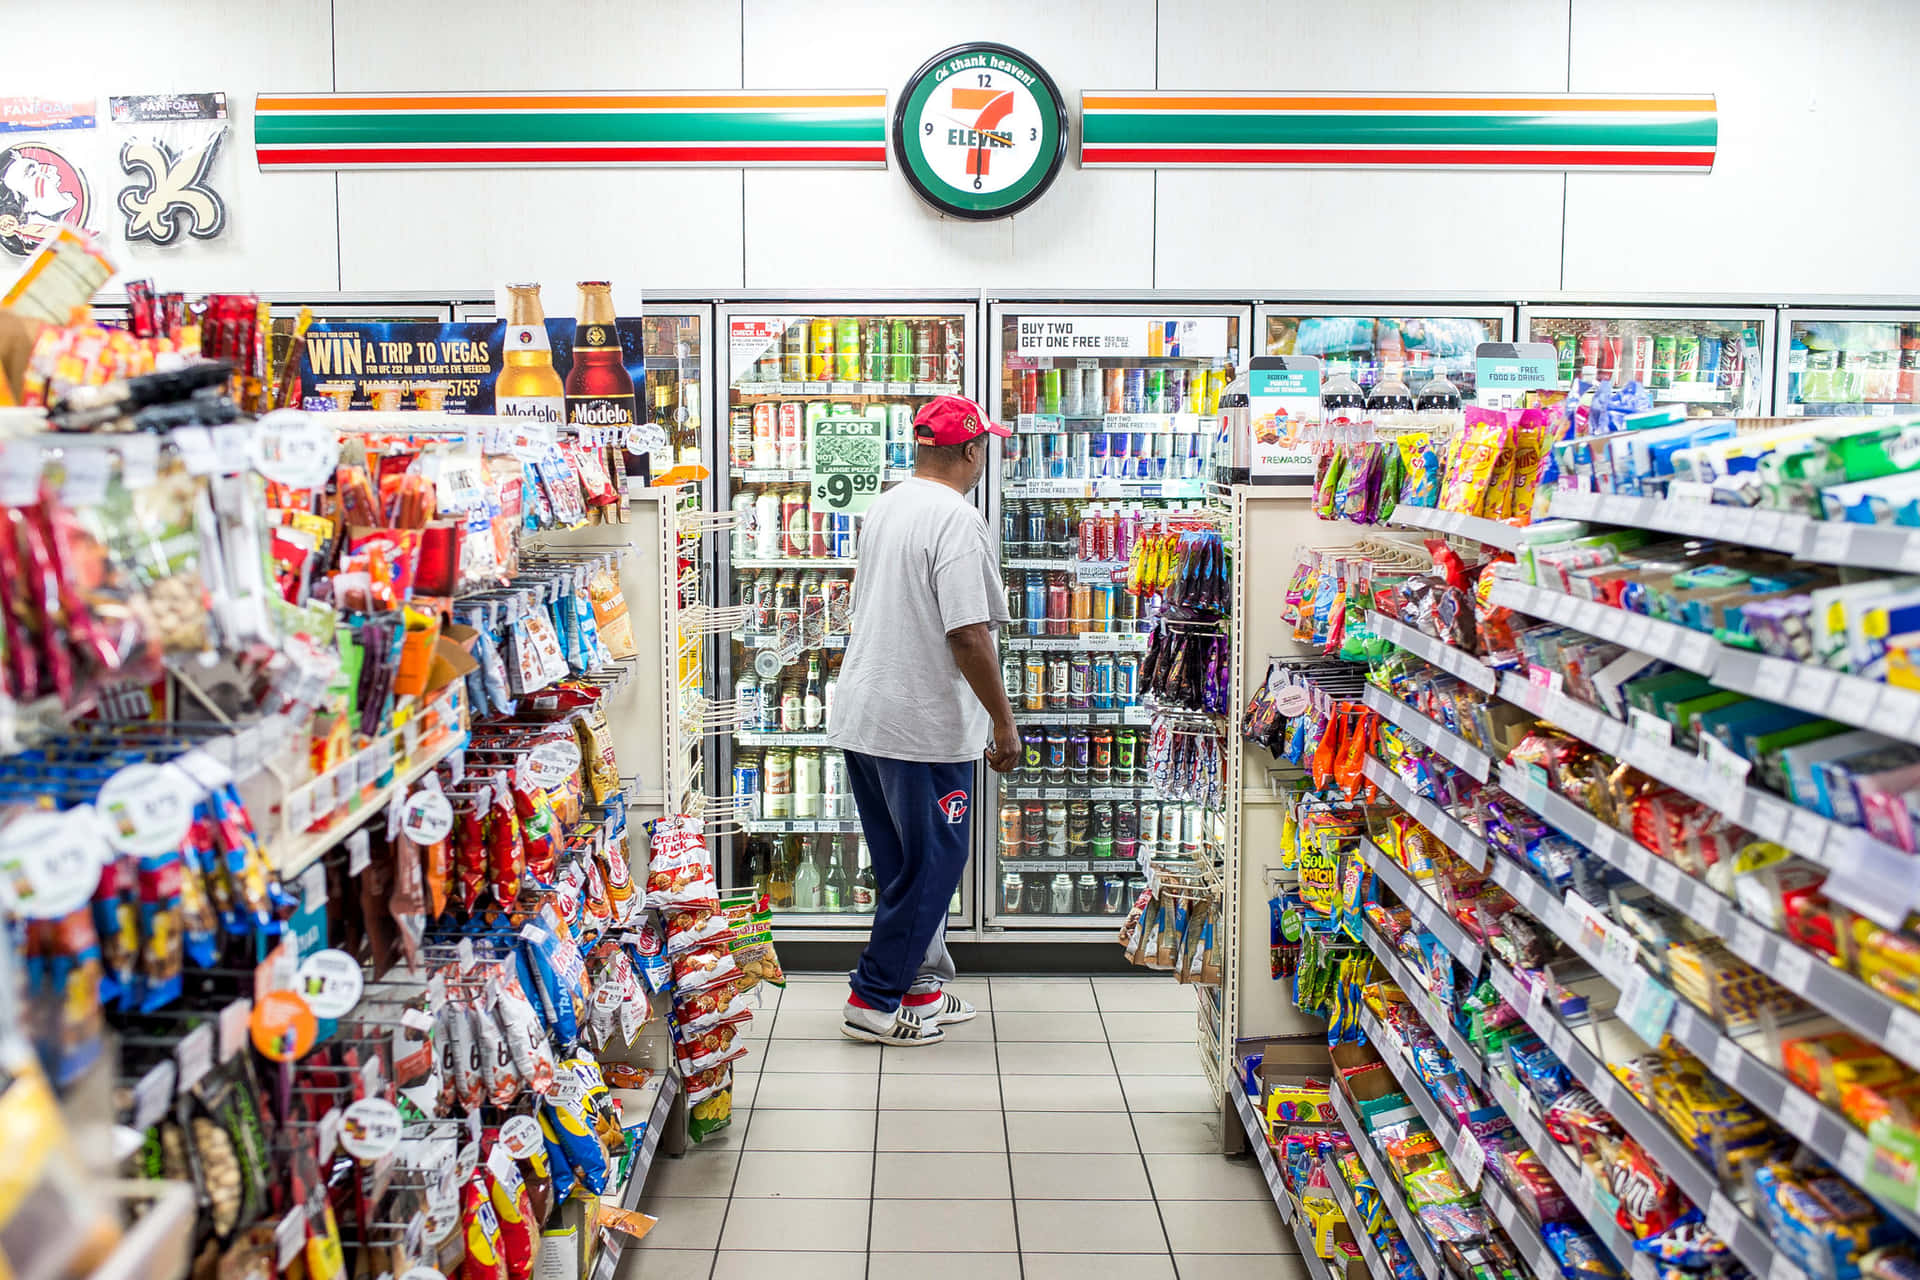 “Find everything you need at your local 7 Eleven”